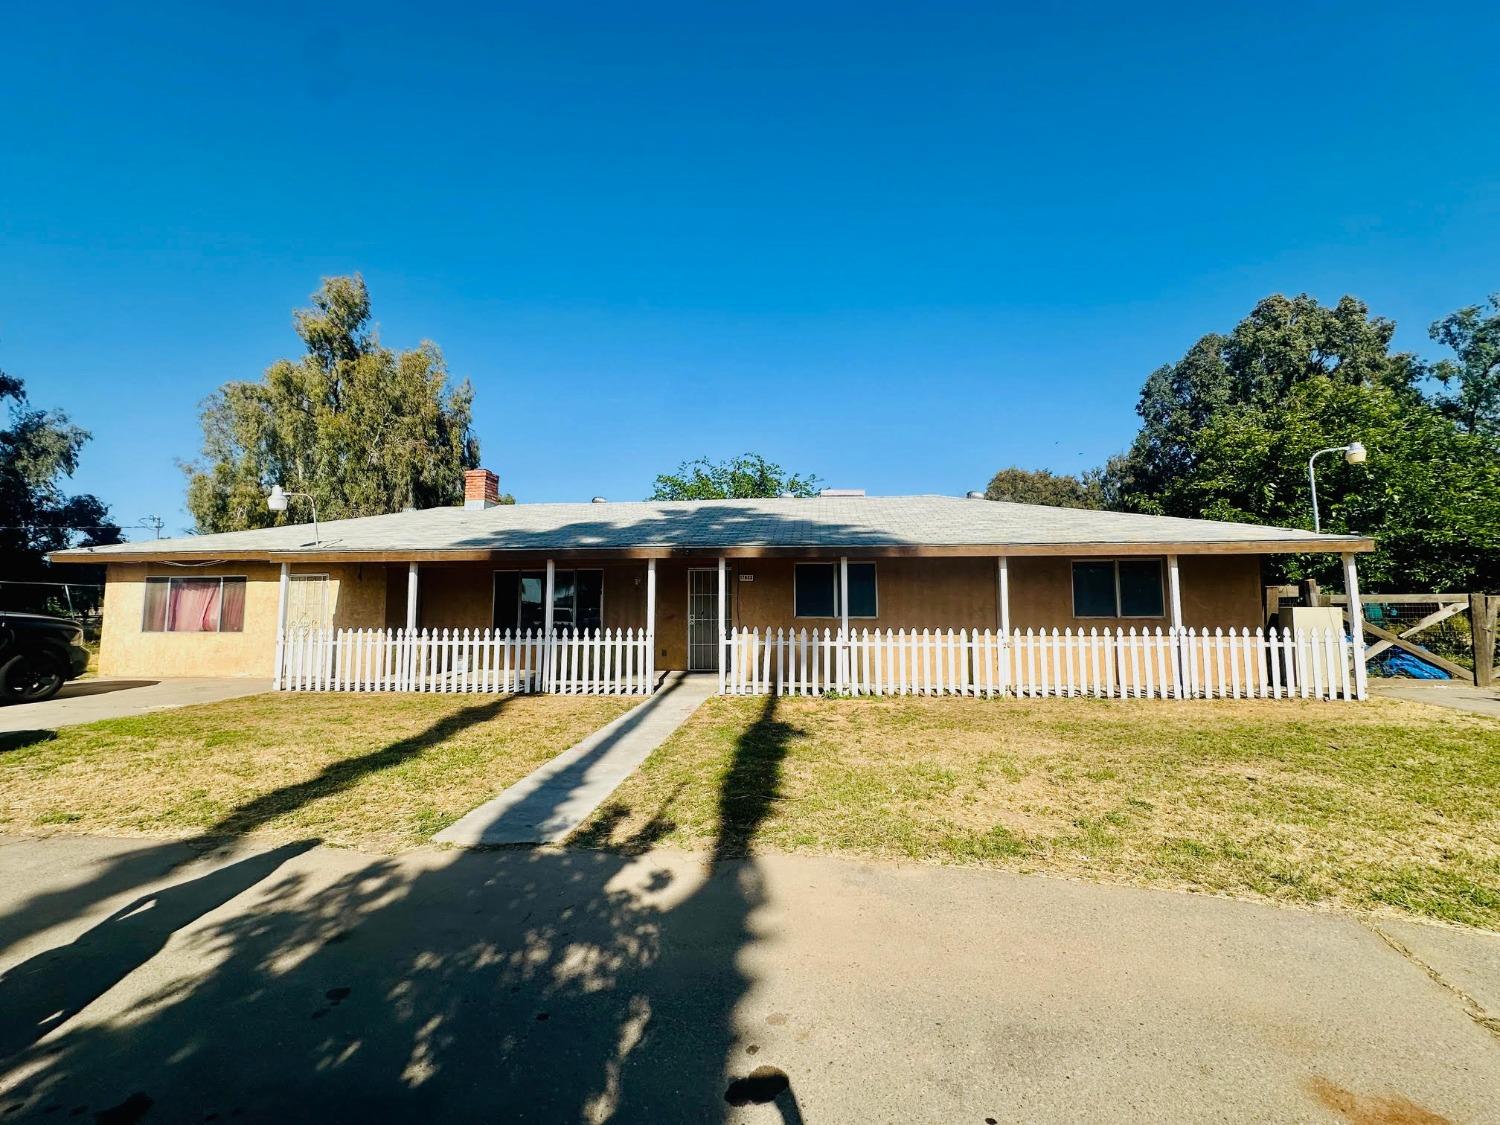 Photo of 17653 Seabright Dr in Madera, CA